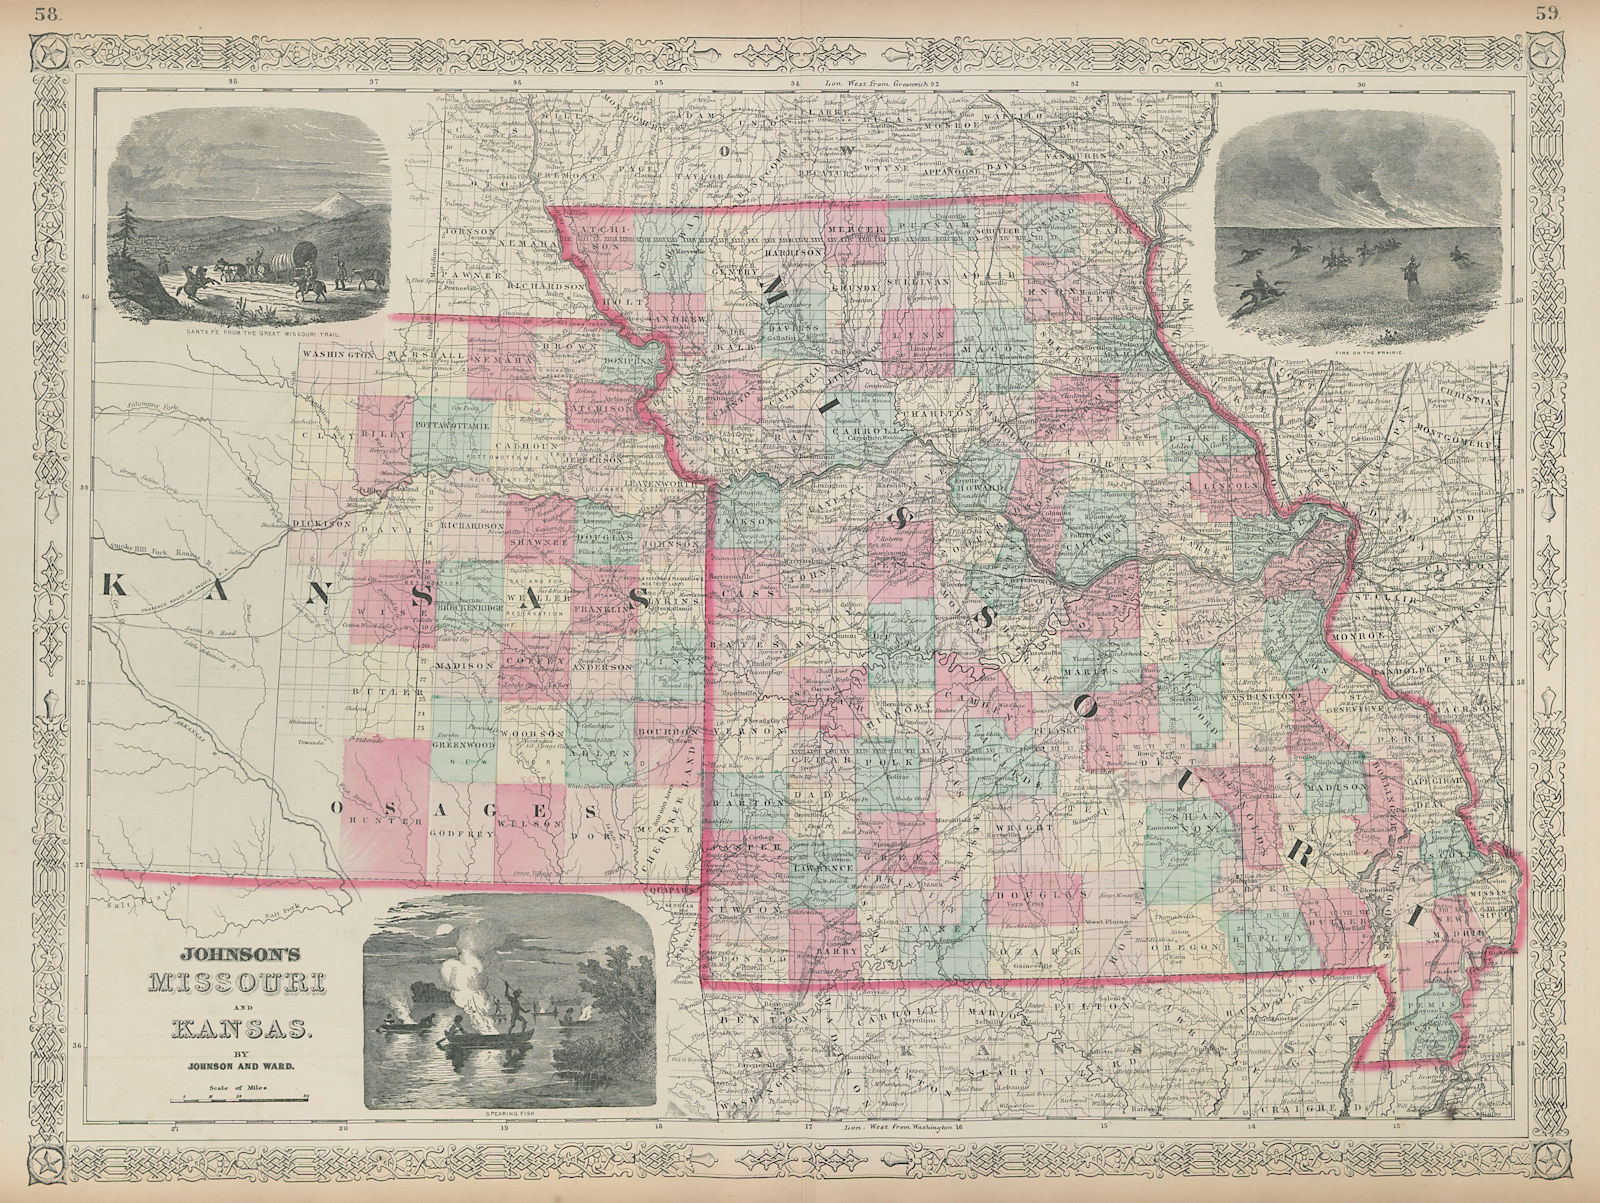 Associate Product Johnson's Missouri & Kansas. US state map showing counties 1865 old